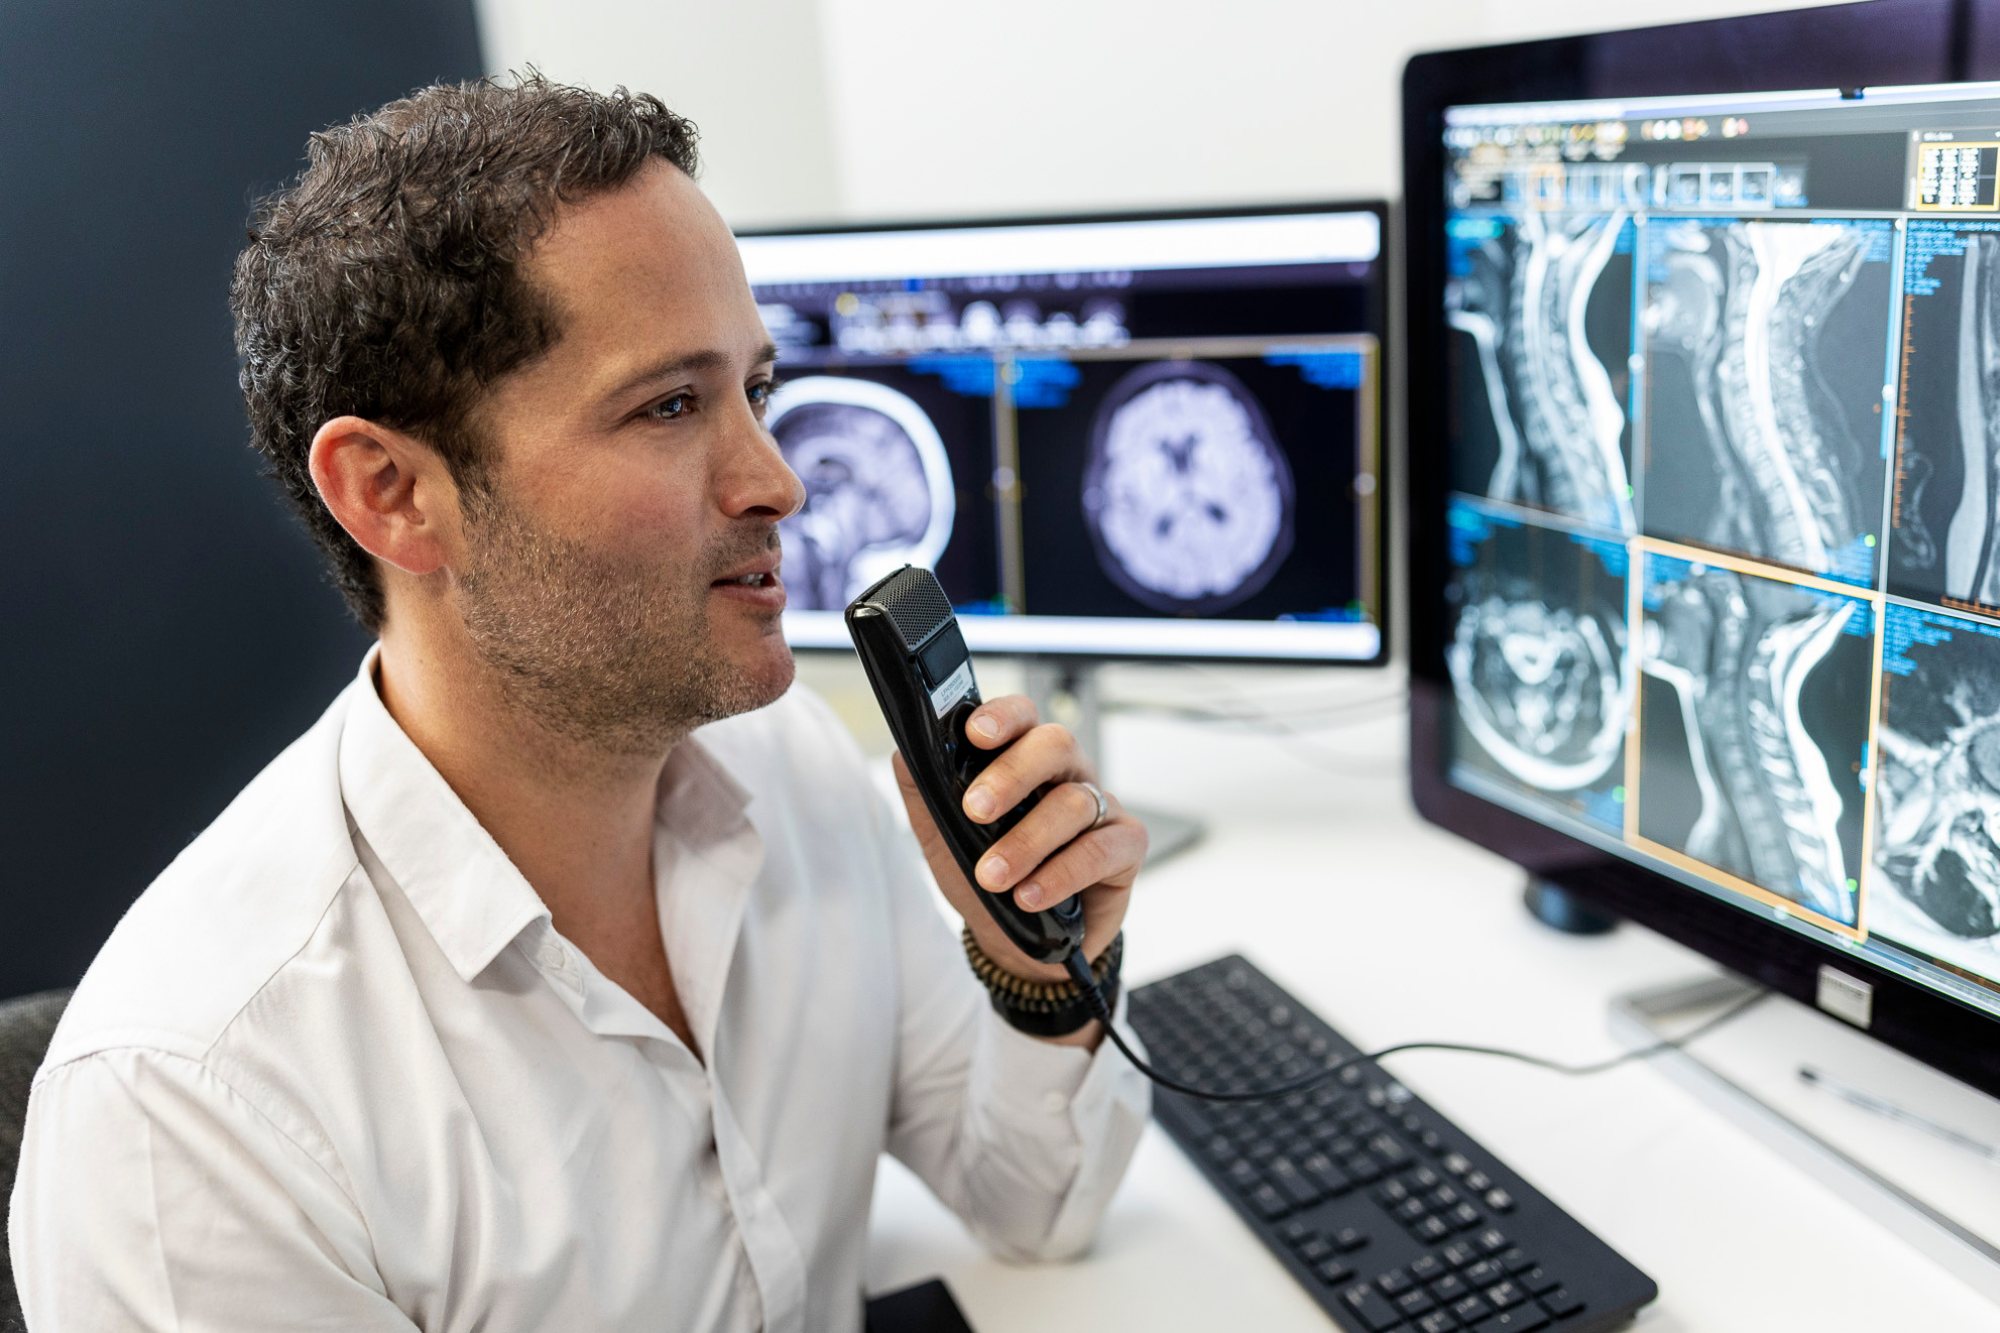 Male Radiologist Speaking Into the Dictation Recorder | Medical Imaging Experts | FMIG